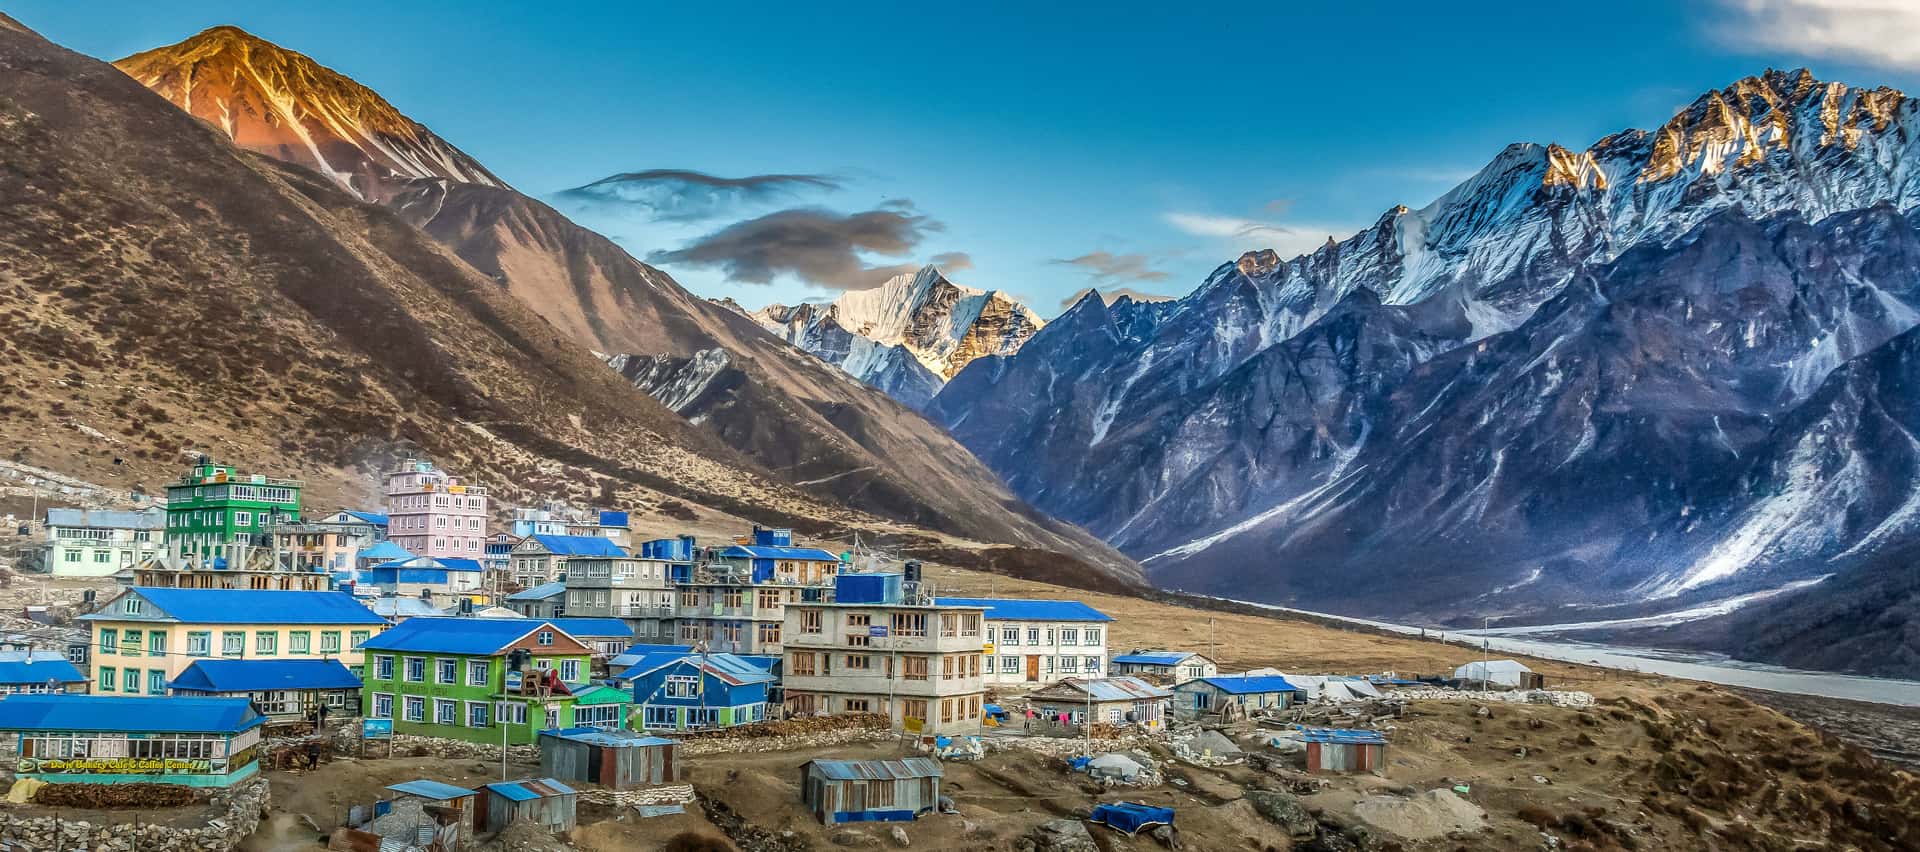 Langtang Valley Trek-Cost, Guide & details itinerary